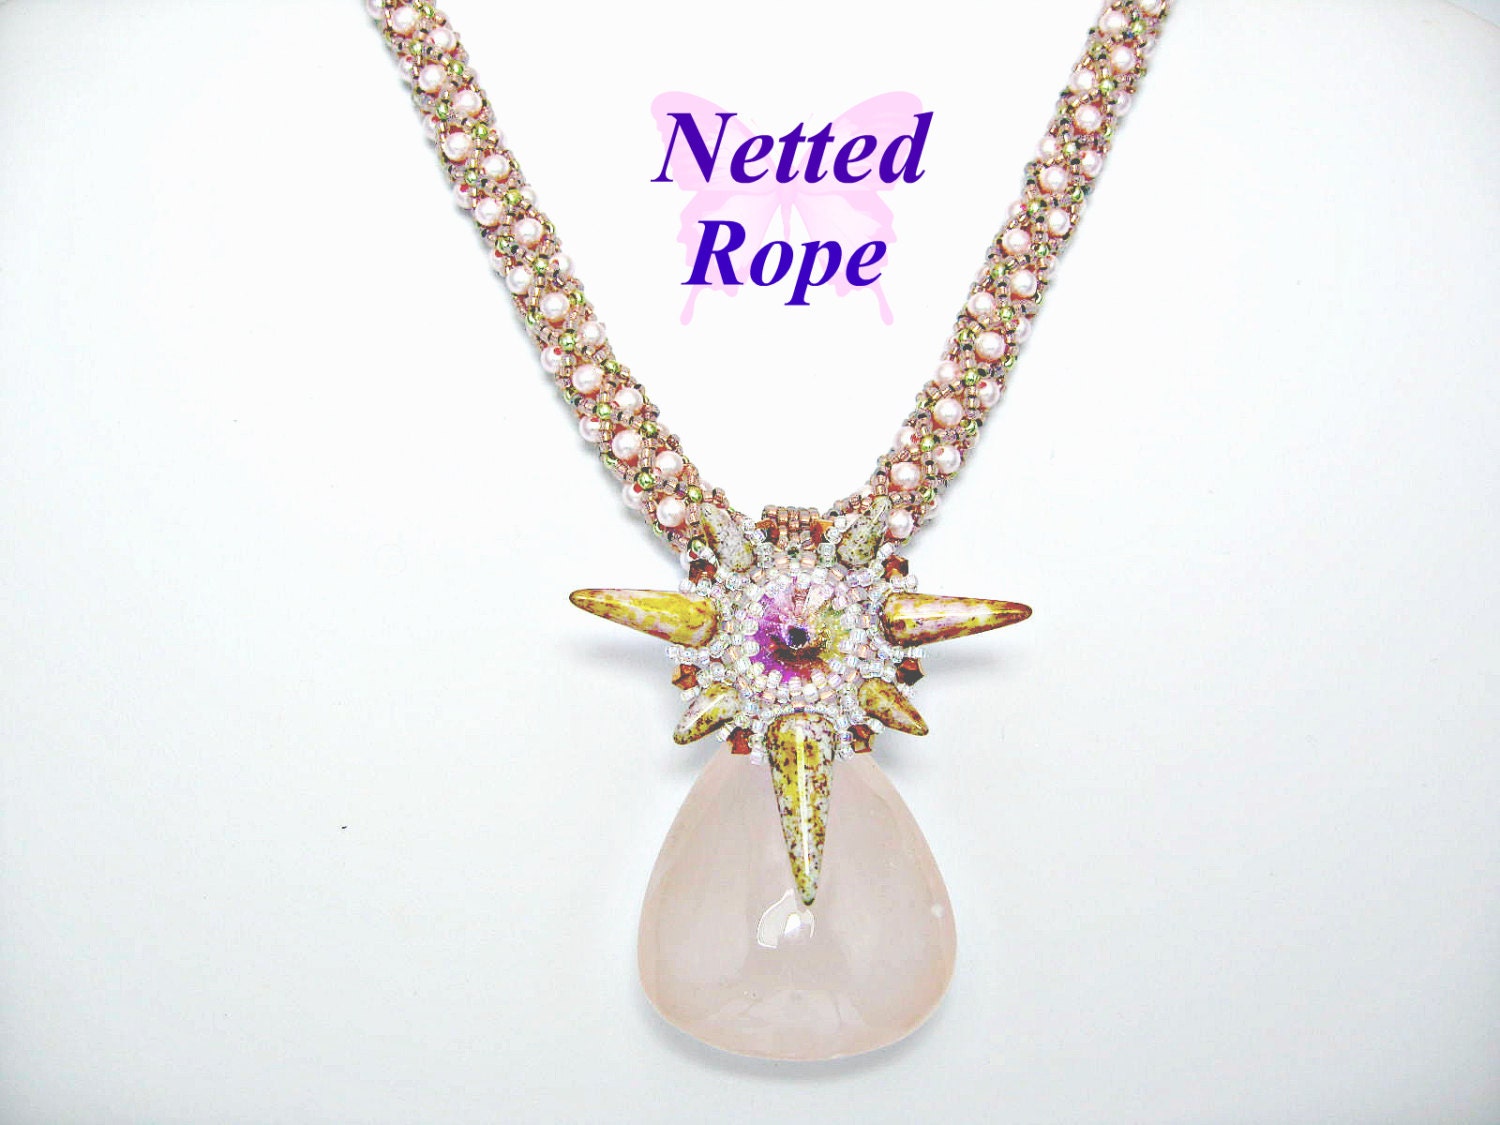 Tutorial Netted Rope Necklace Pattern to make a beaded rope